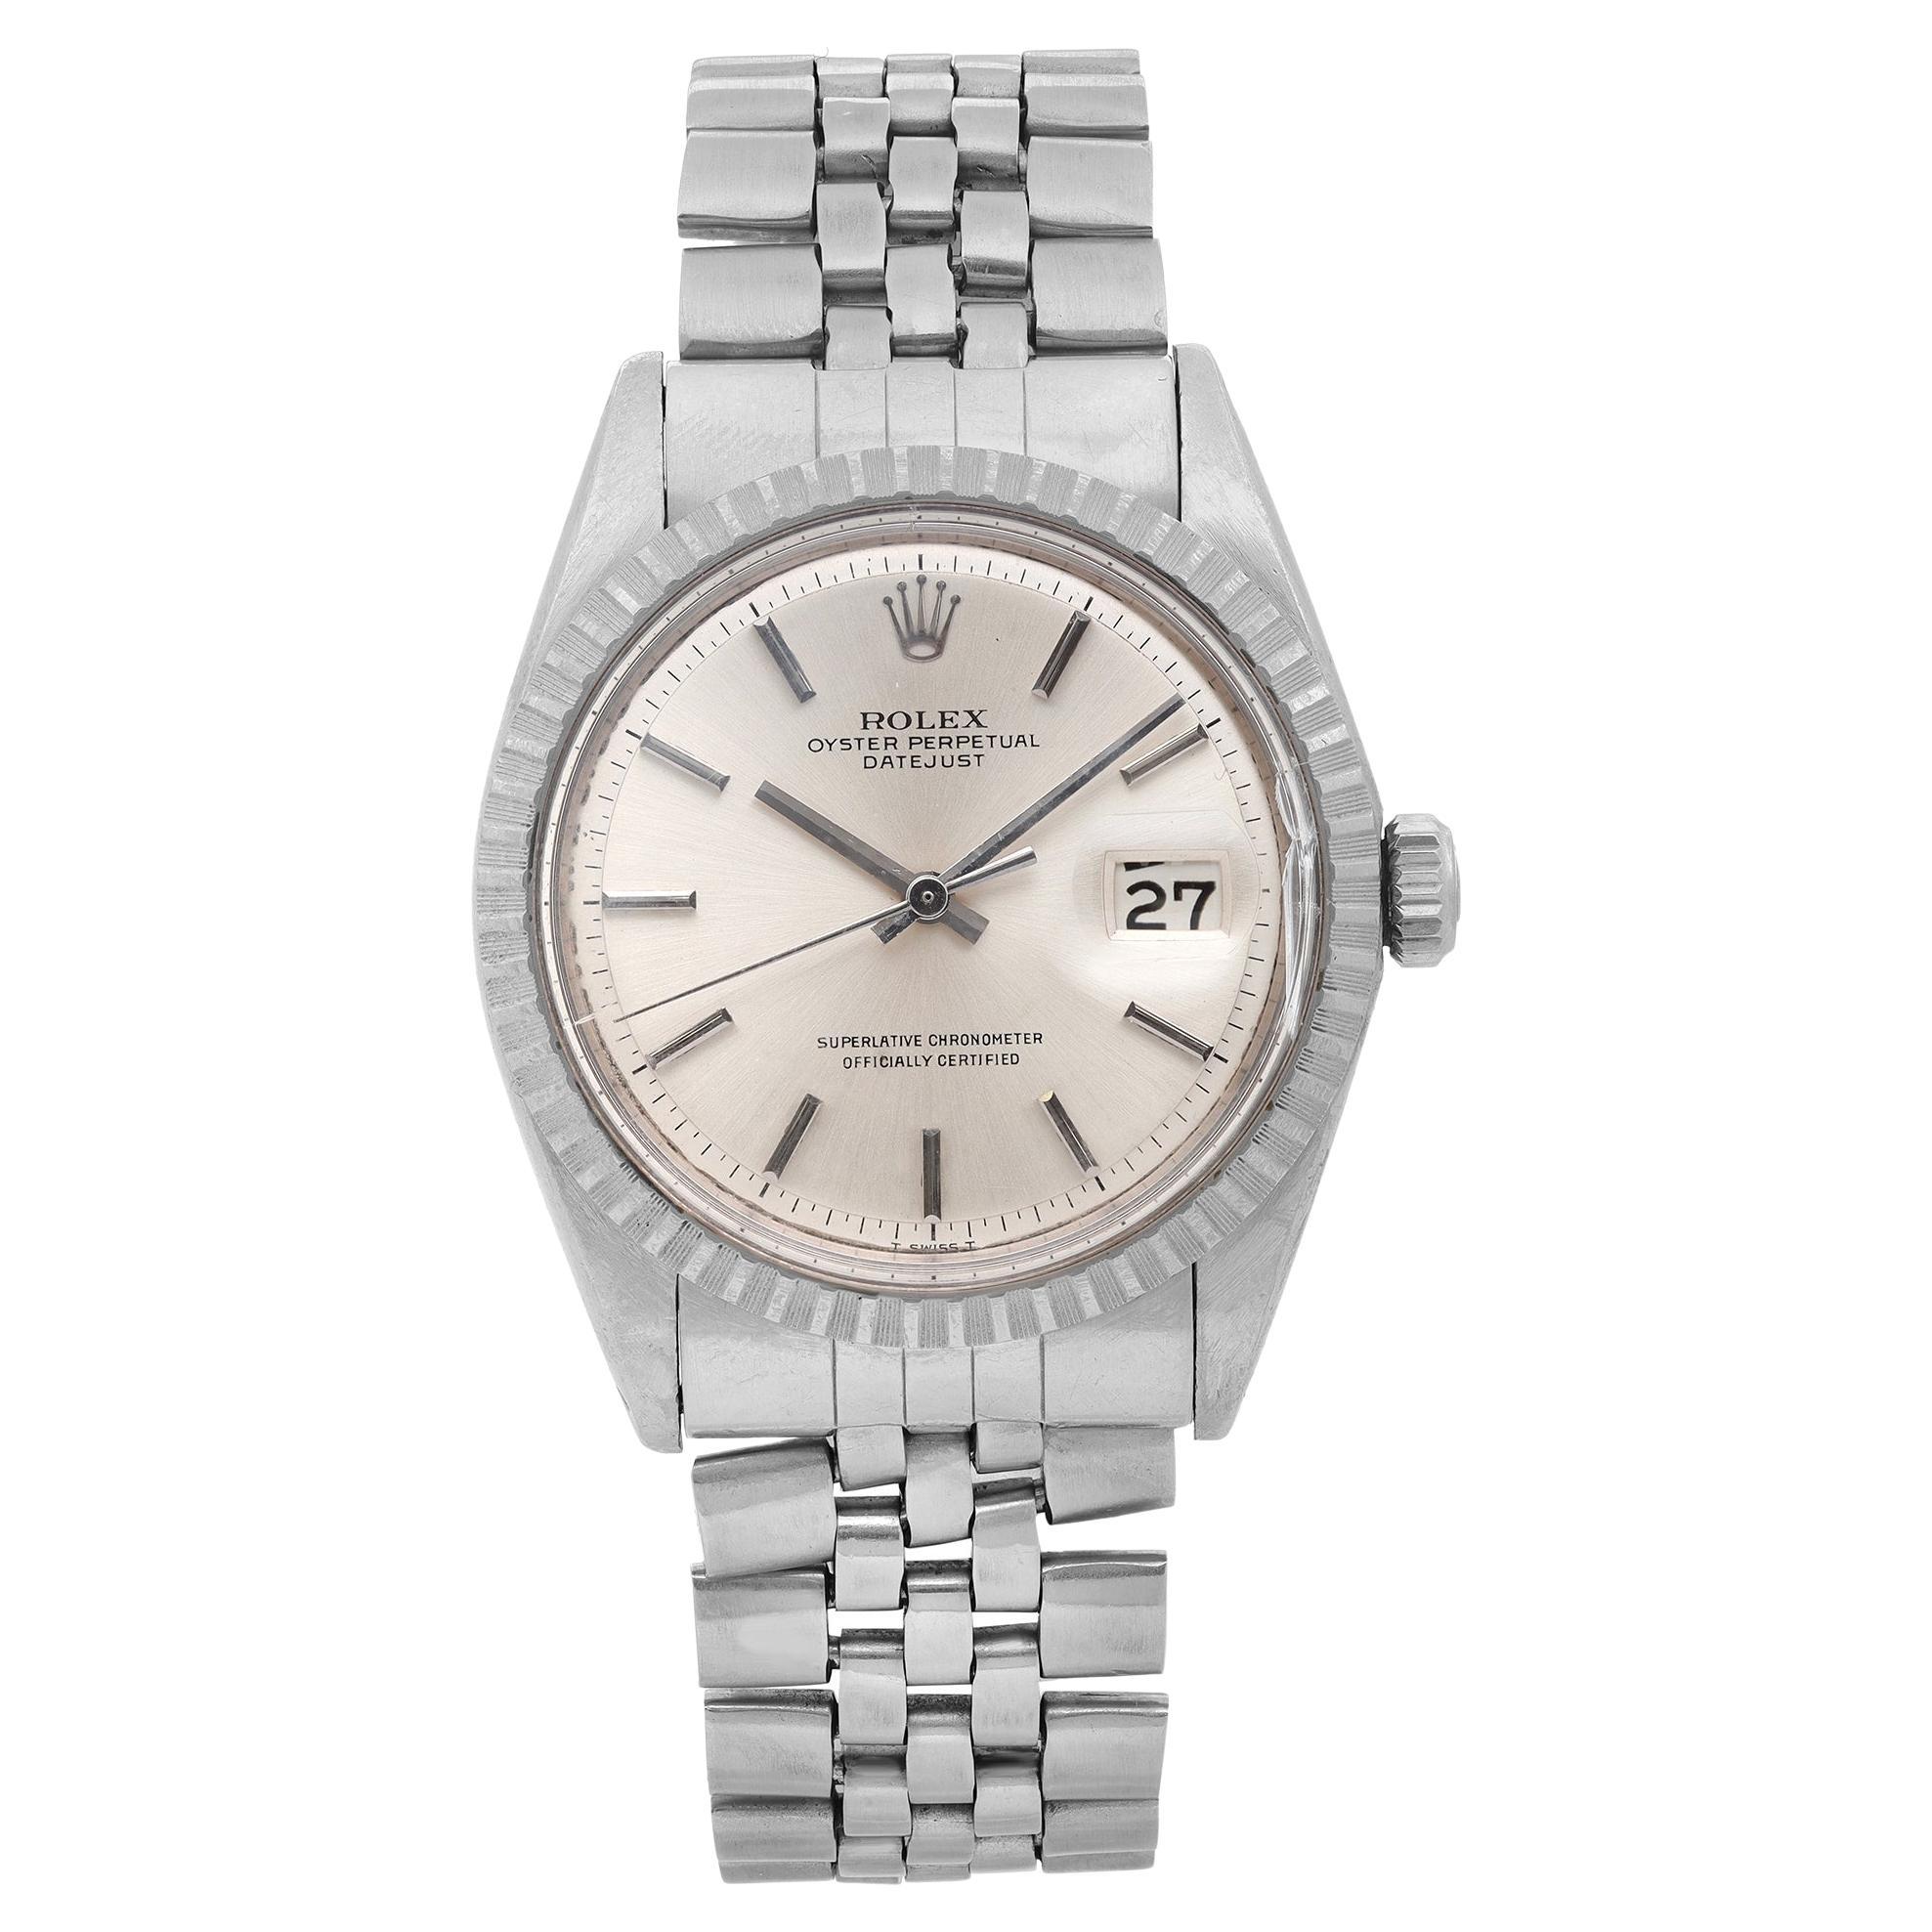 Rolex Datejust Stainless Steel Silver Dial Automatic Men Watch 1601